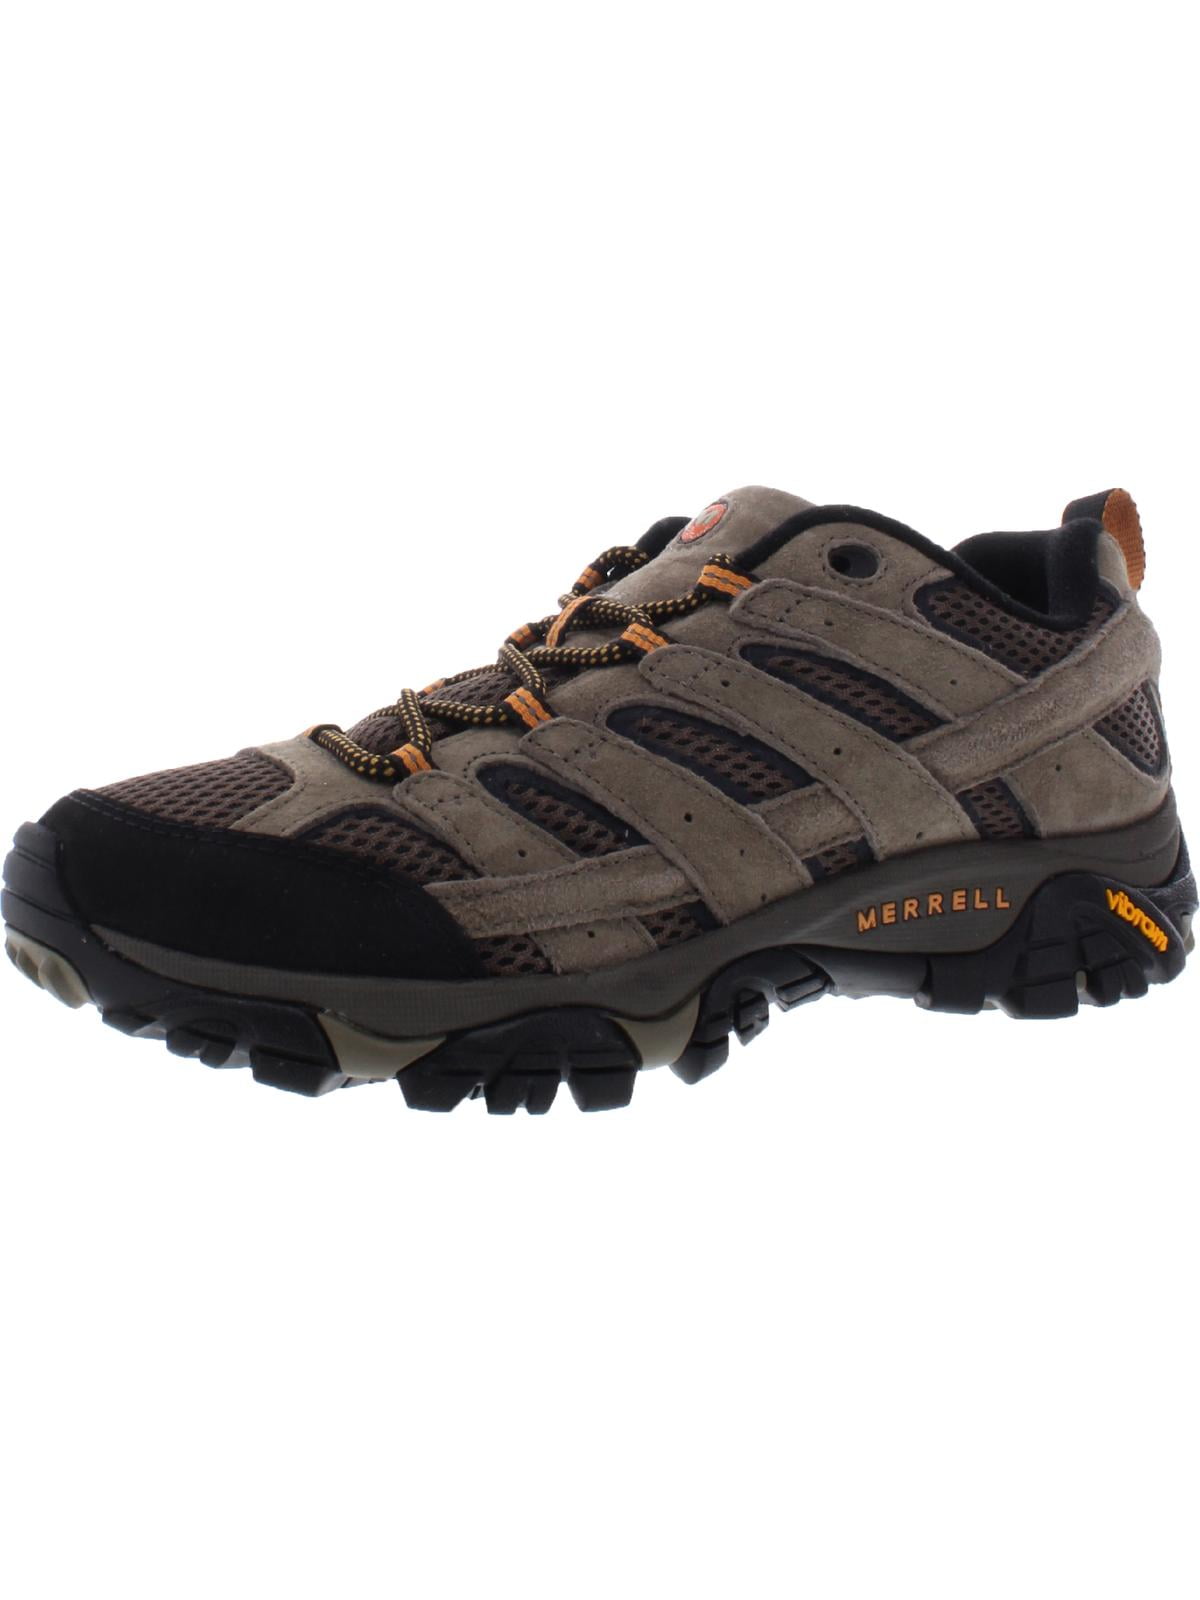 Details about   MERRELL Moab 2 Ventilator J06011 Trekking Hiking Outdoor Trainers Shoes Mens New 